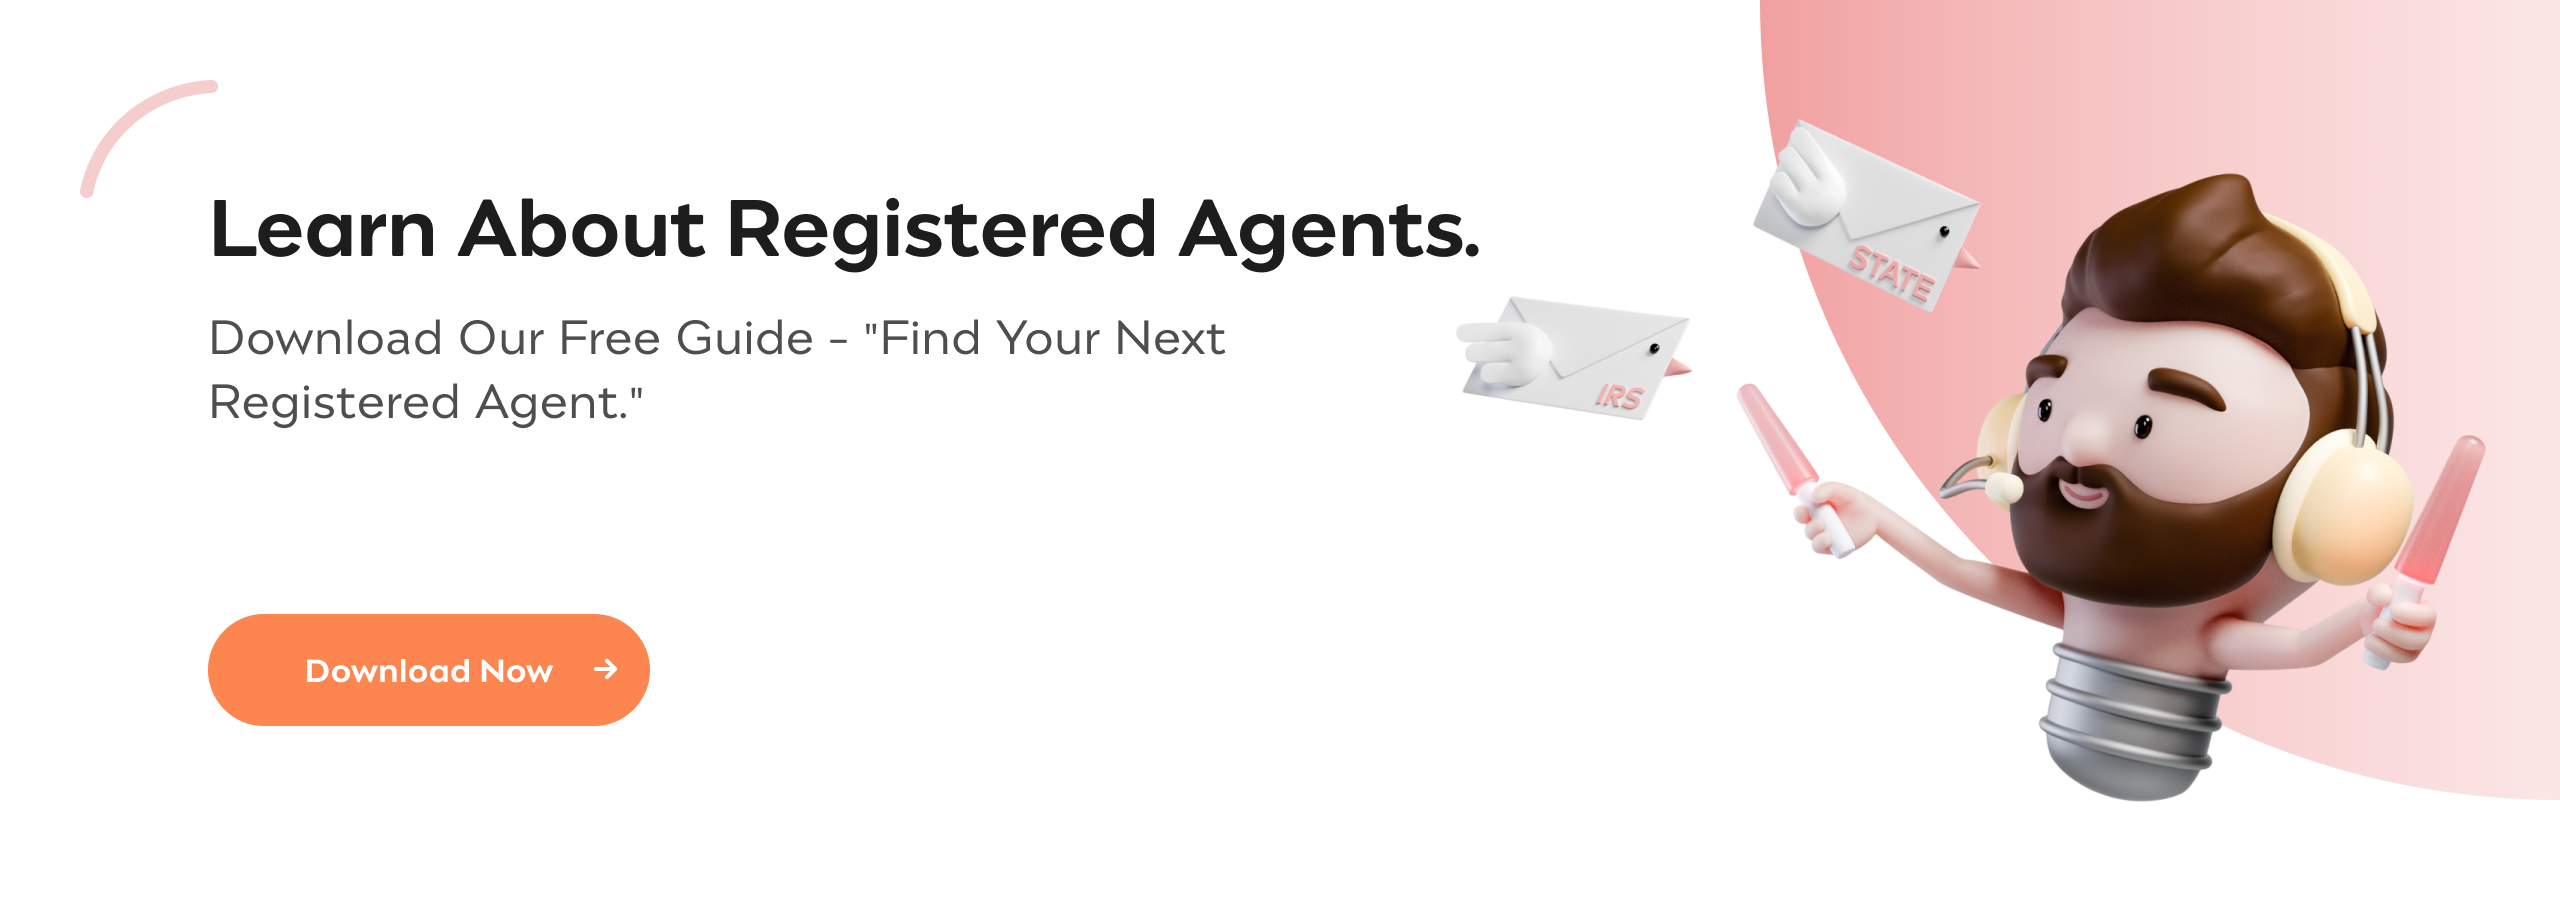 Learn About Registered Agents. Download Our Free Guide - "Find Your Registered Agent".